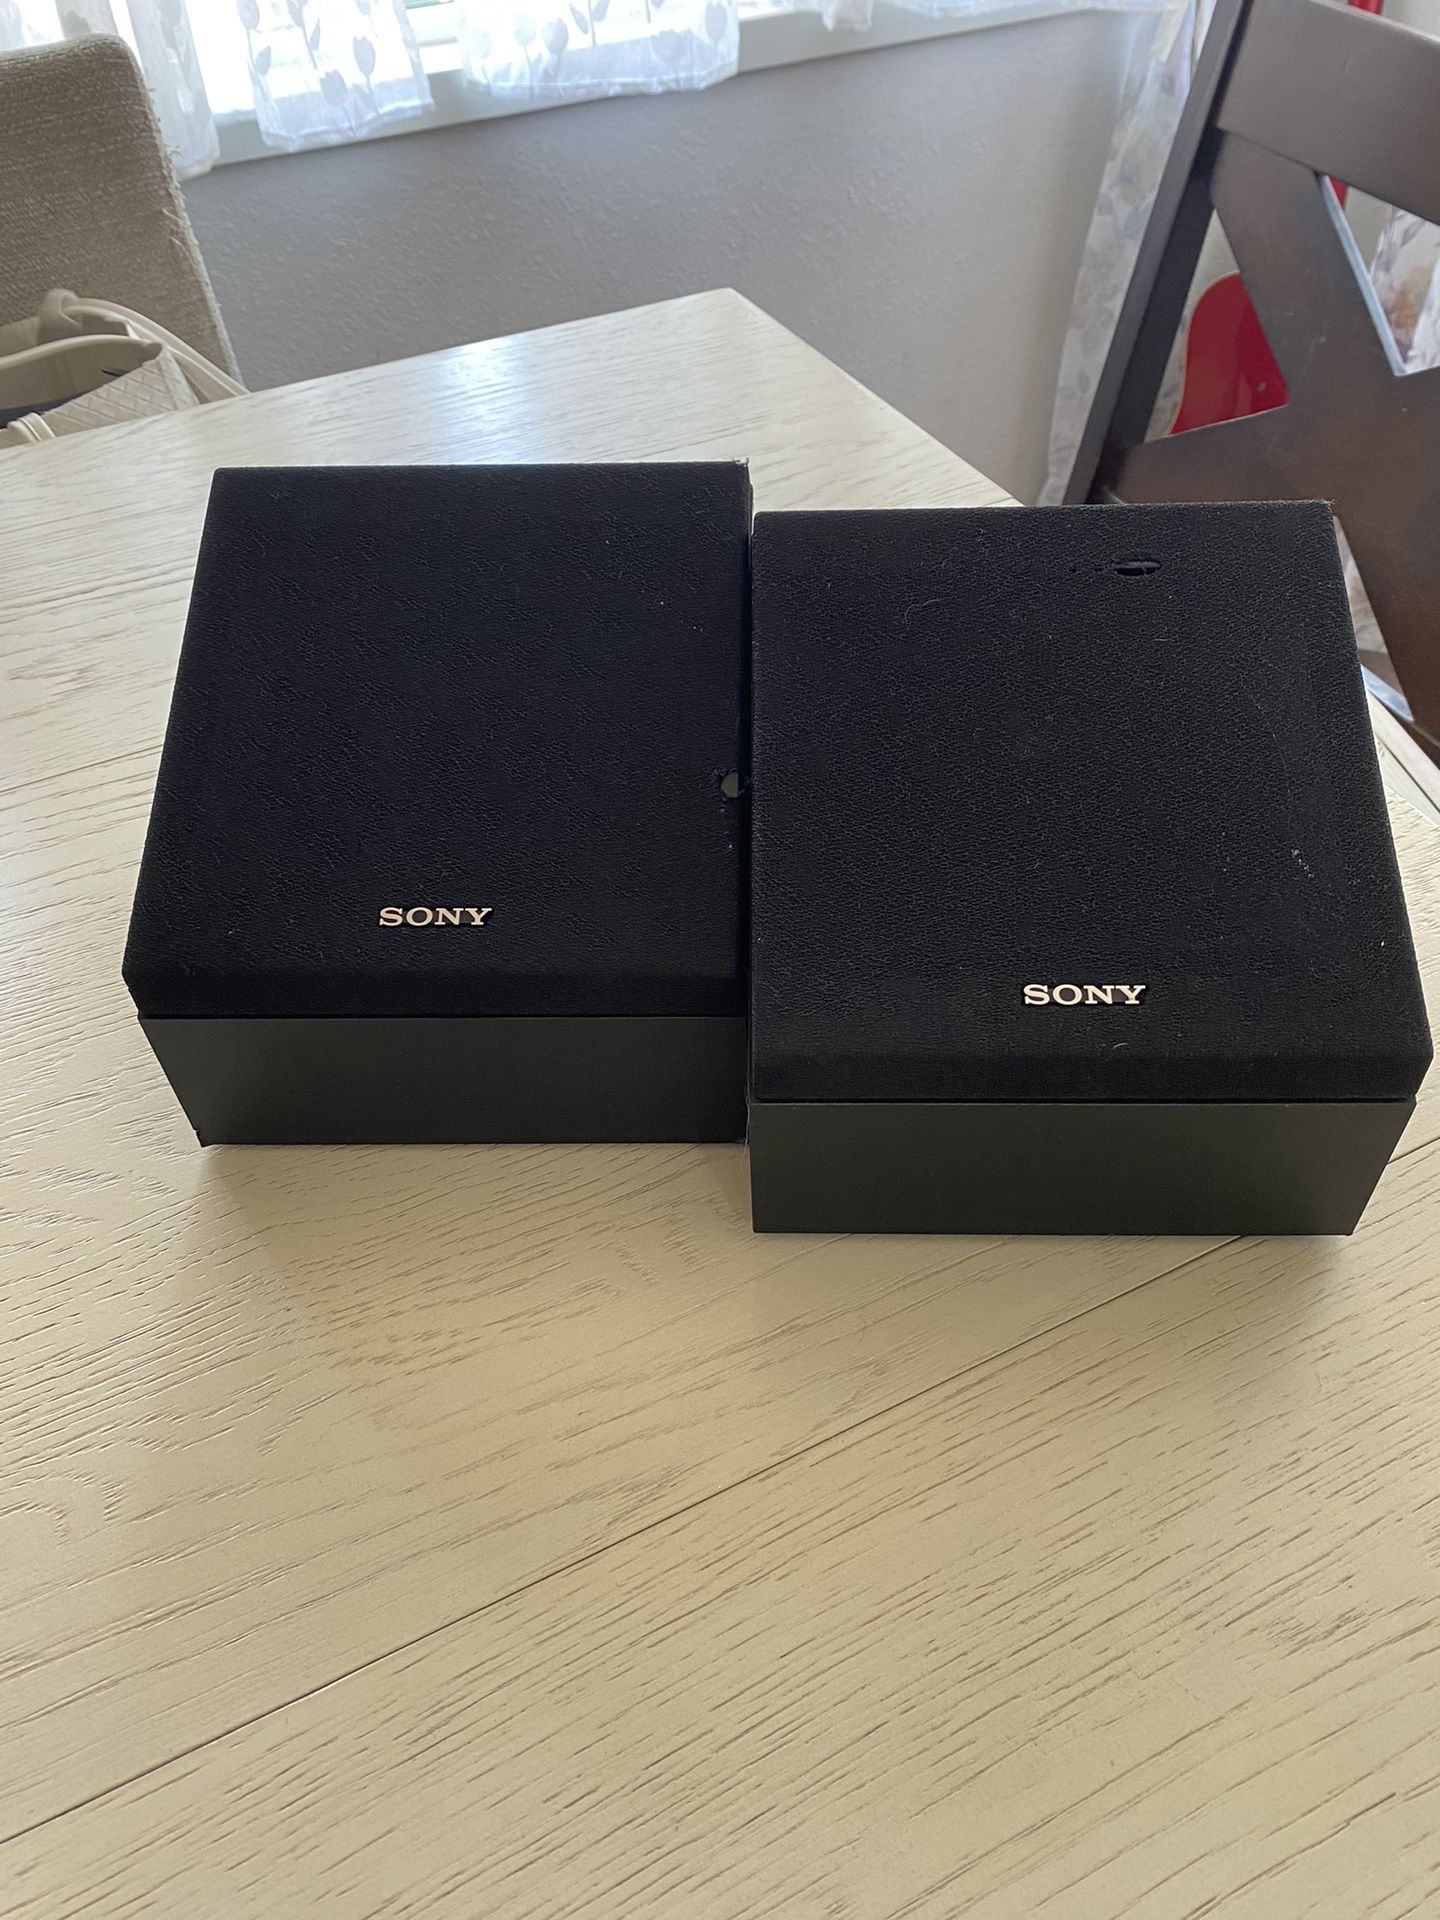 Sony sscse Dolby atmos enabled speakers